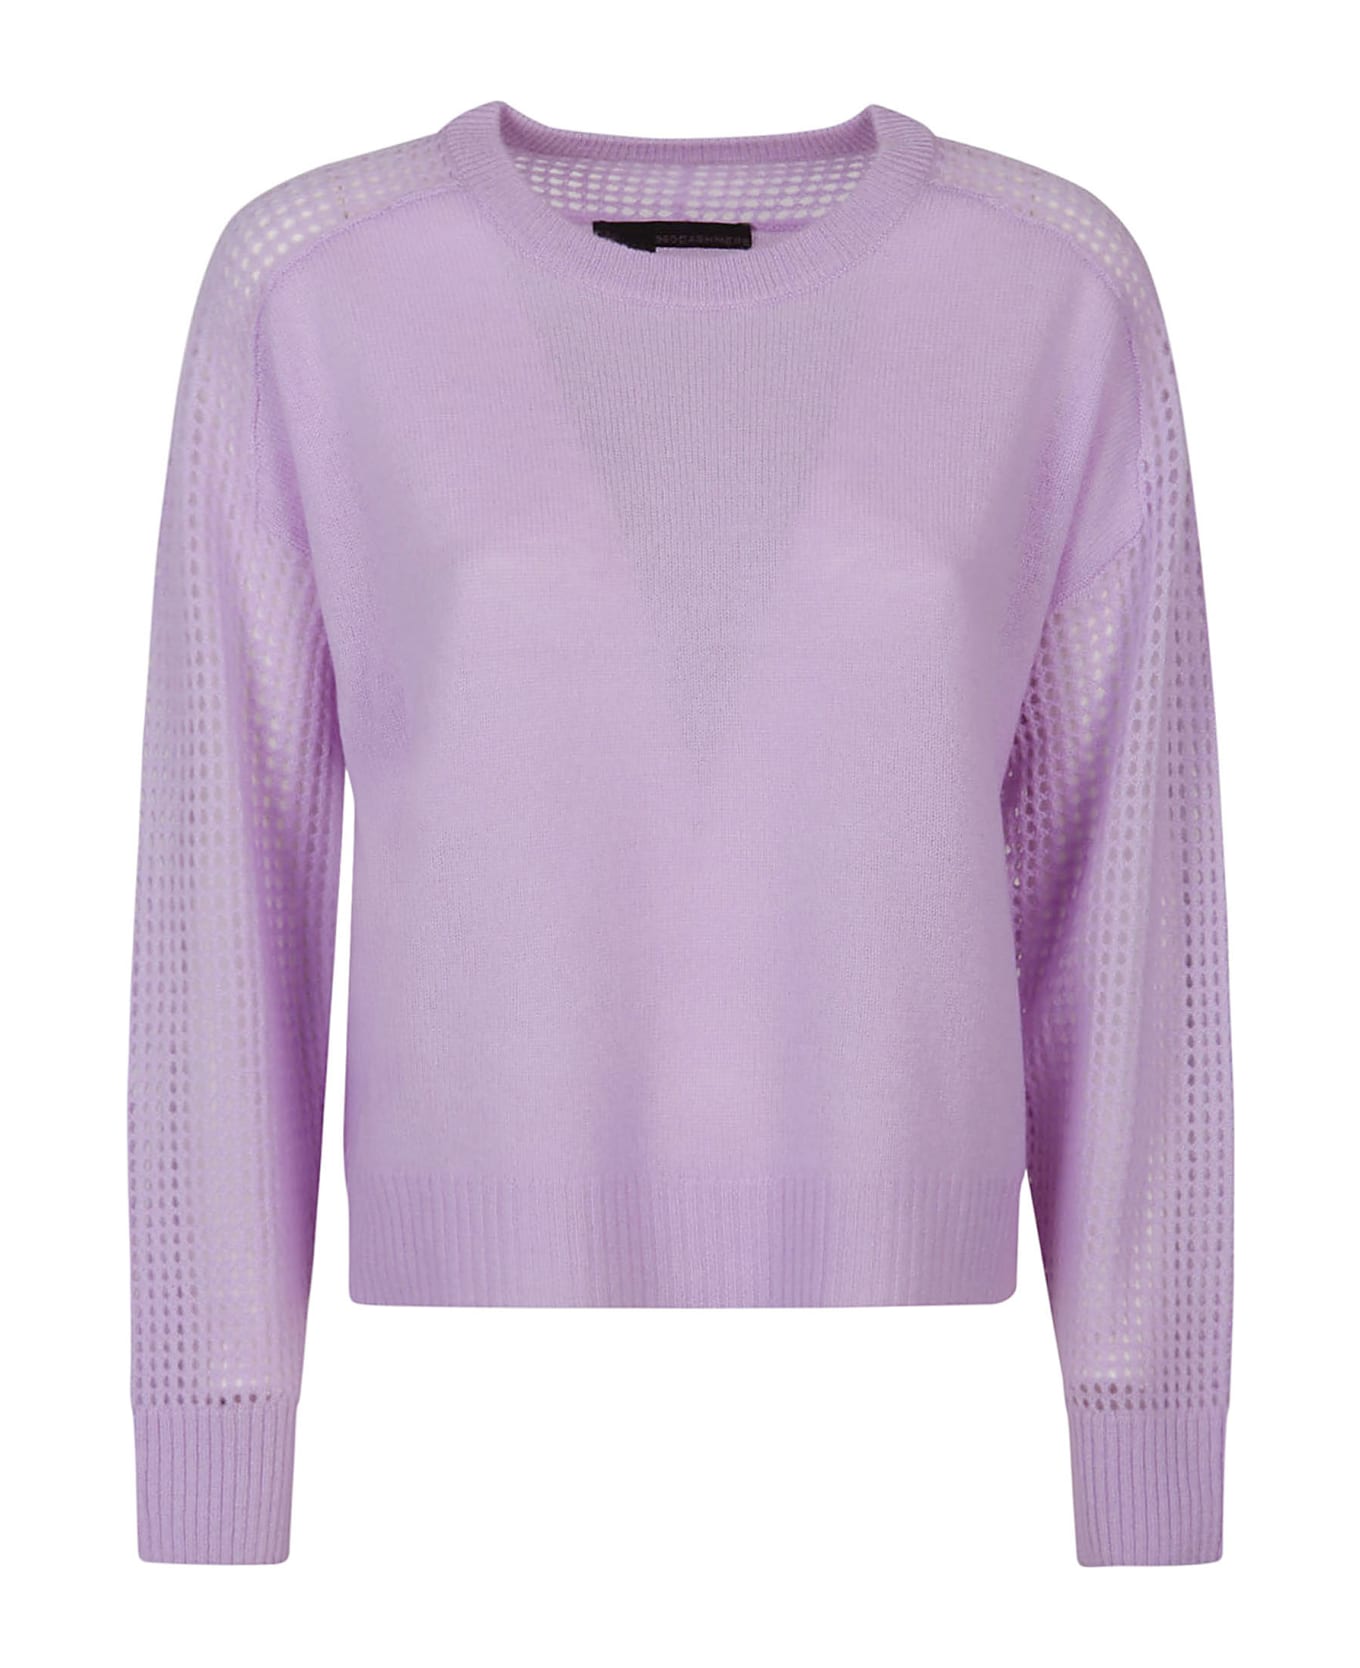 360Cashmere Riley Round Neck Sweater - Orchid